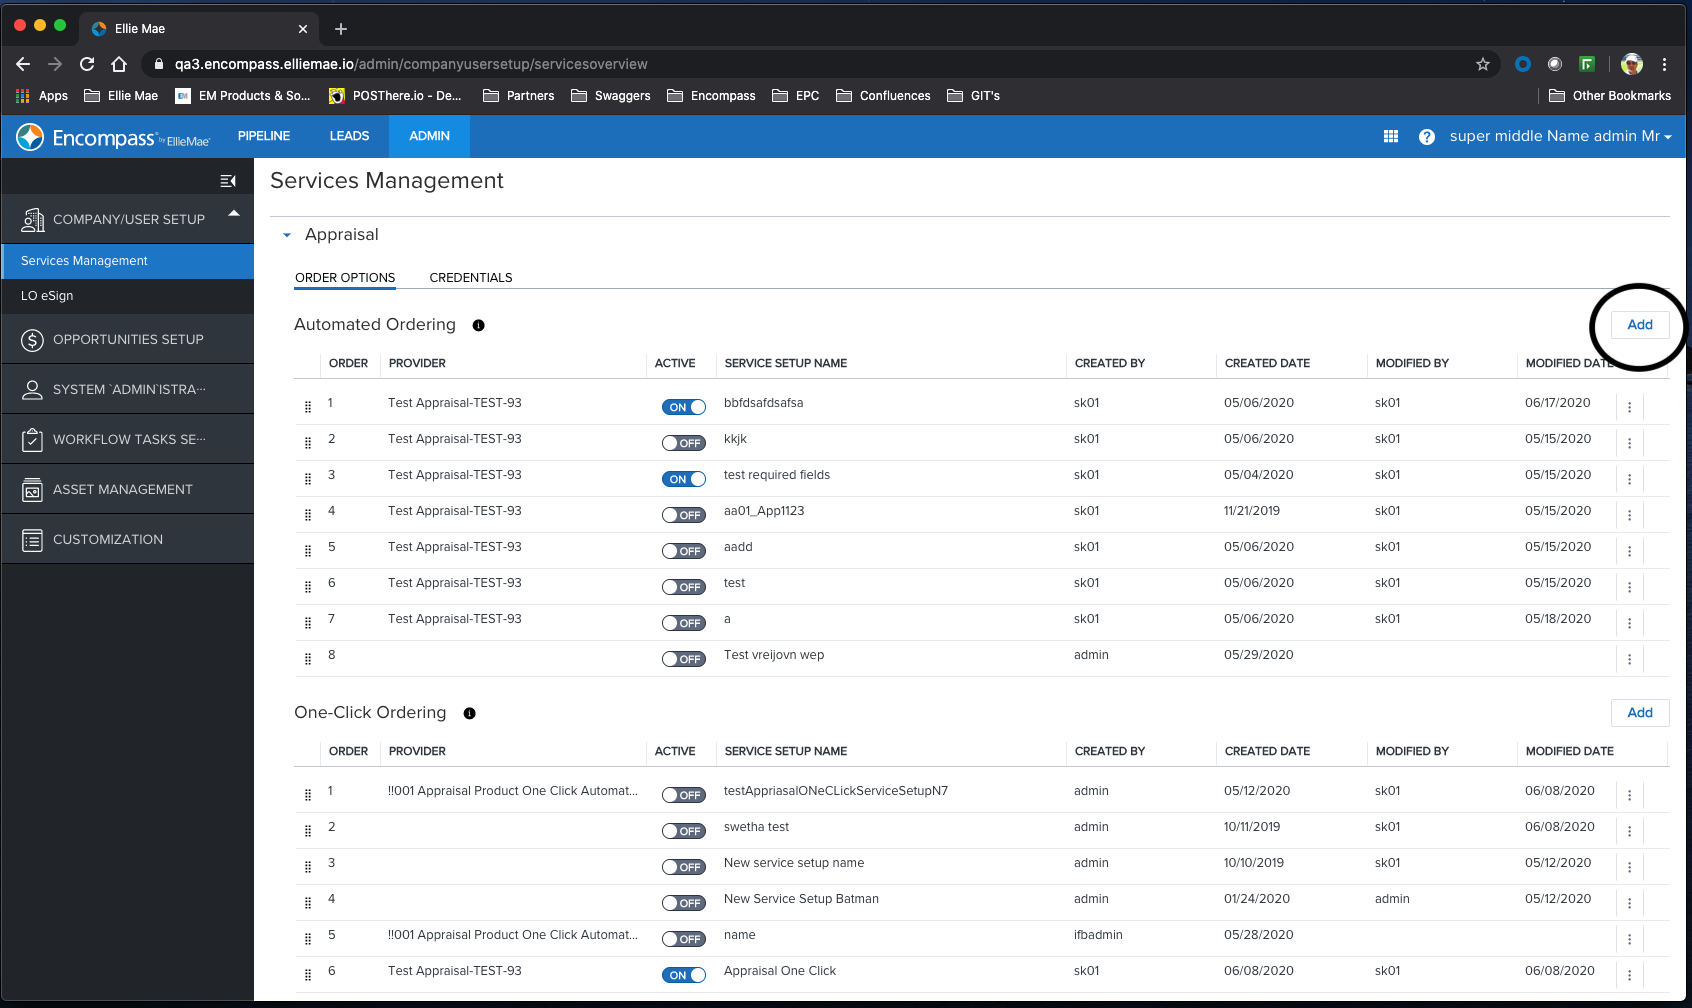 Add a new service setup on the Service Management Page